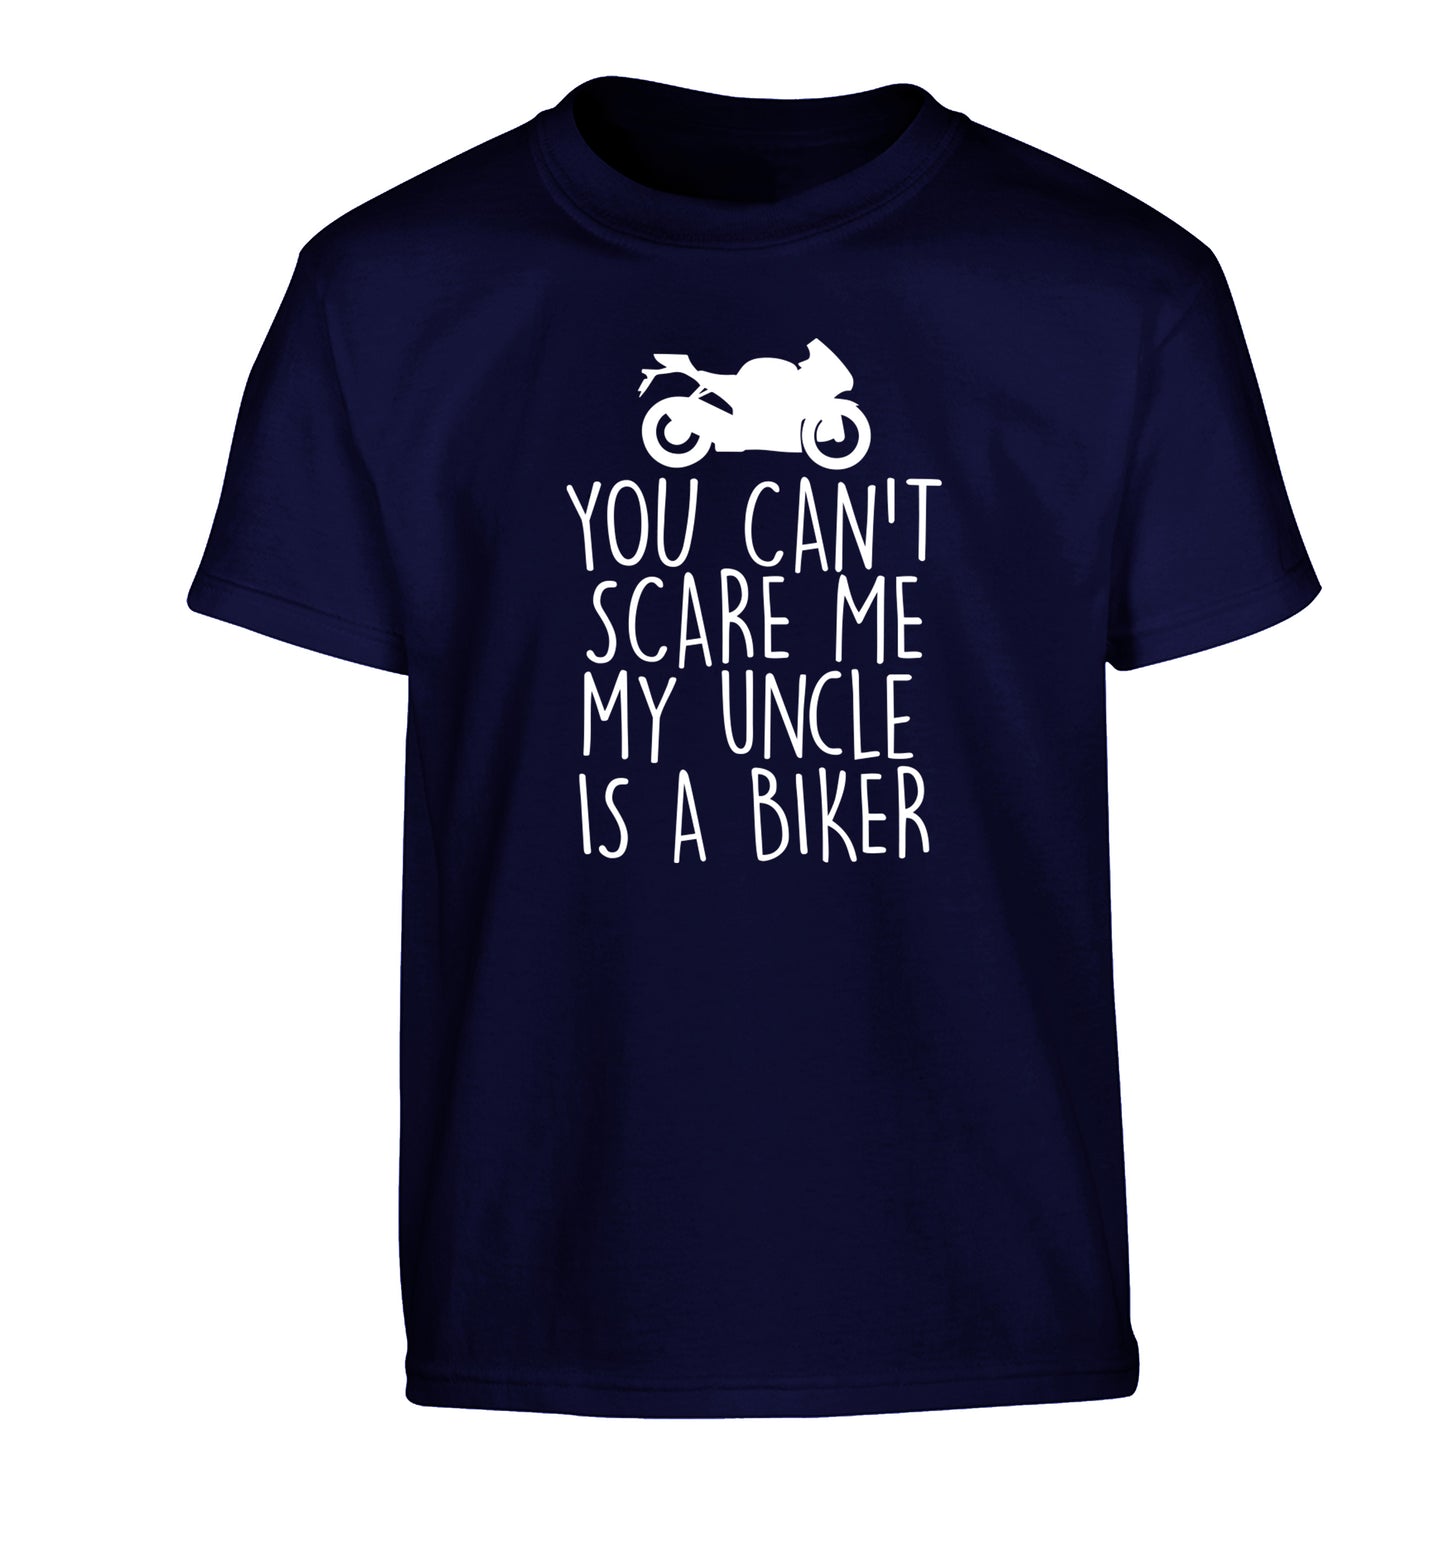 You can't scare me my uncle is a biker Children's navy Tshirt 12-13 Years